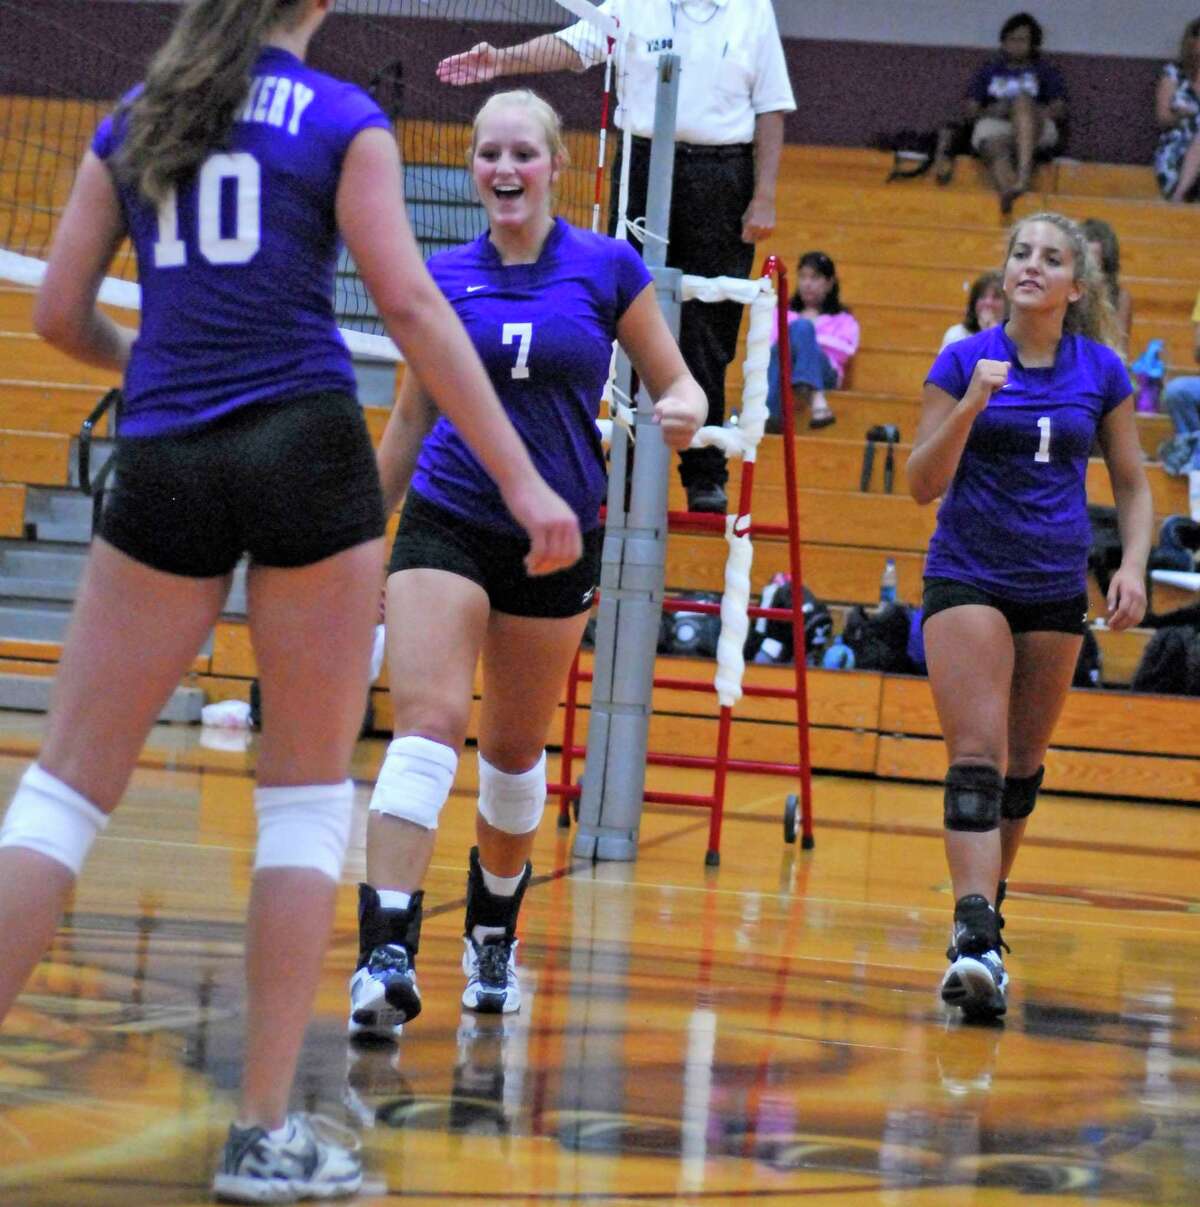 Lizzy Bache (#10) Stormi Champion (#7) and Caitlin Ogletree (#1) of Montgomery play against Spring Woods in the Katy ISD Varsity Volleyball Classic Thursday 8/13/09.